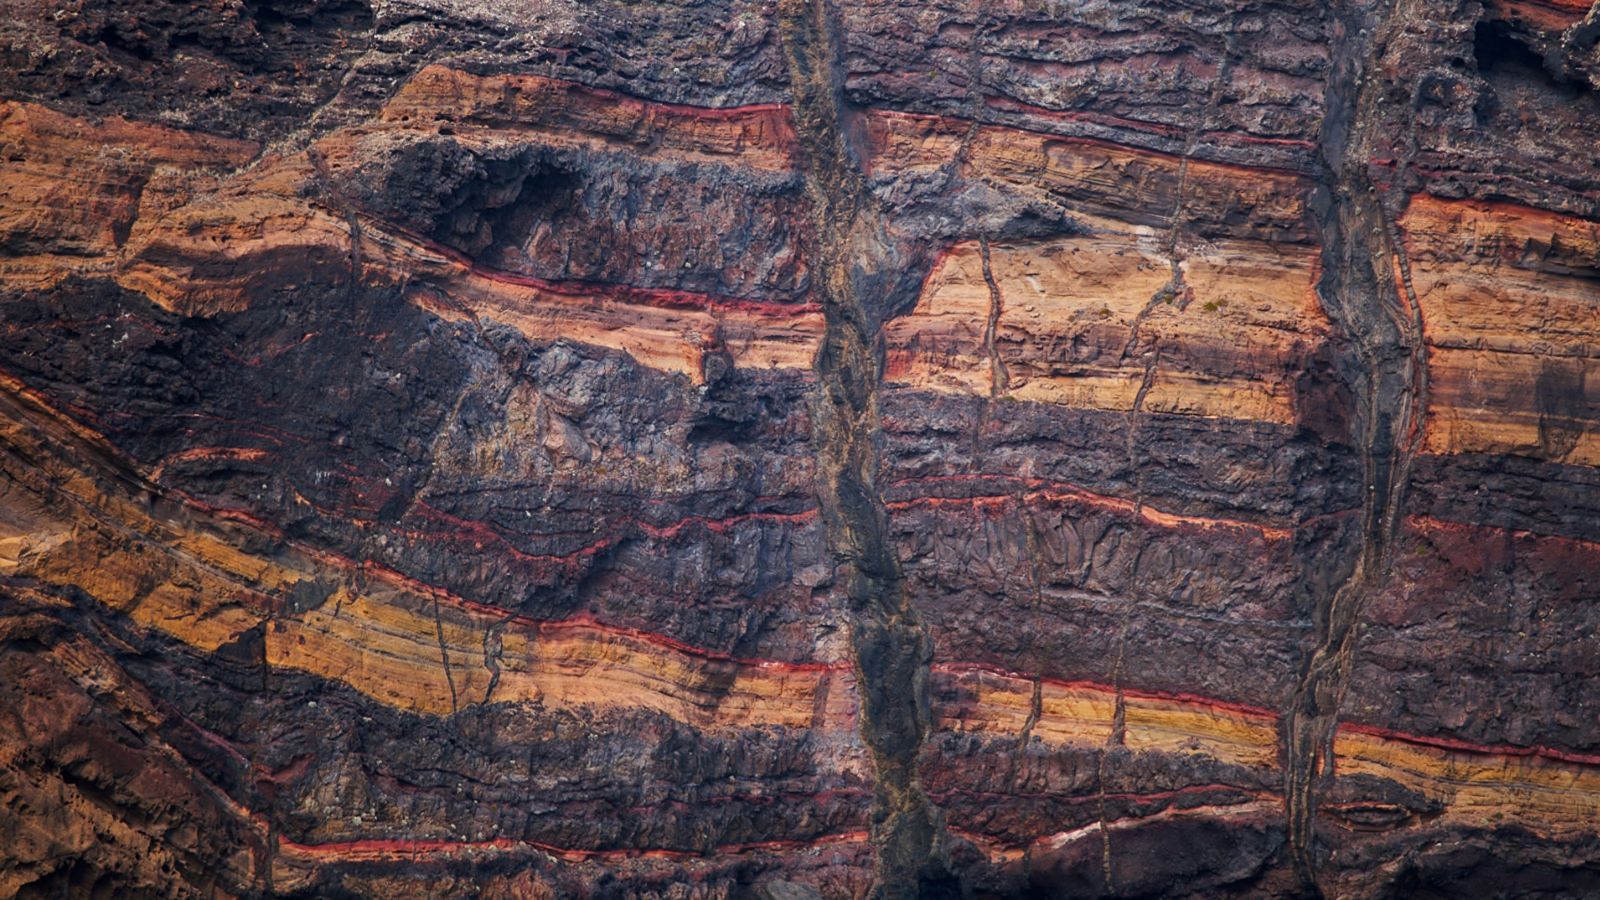 A slice of the Earth’s crust